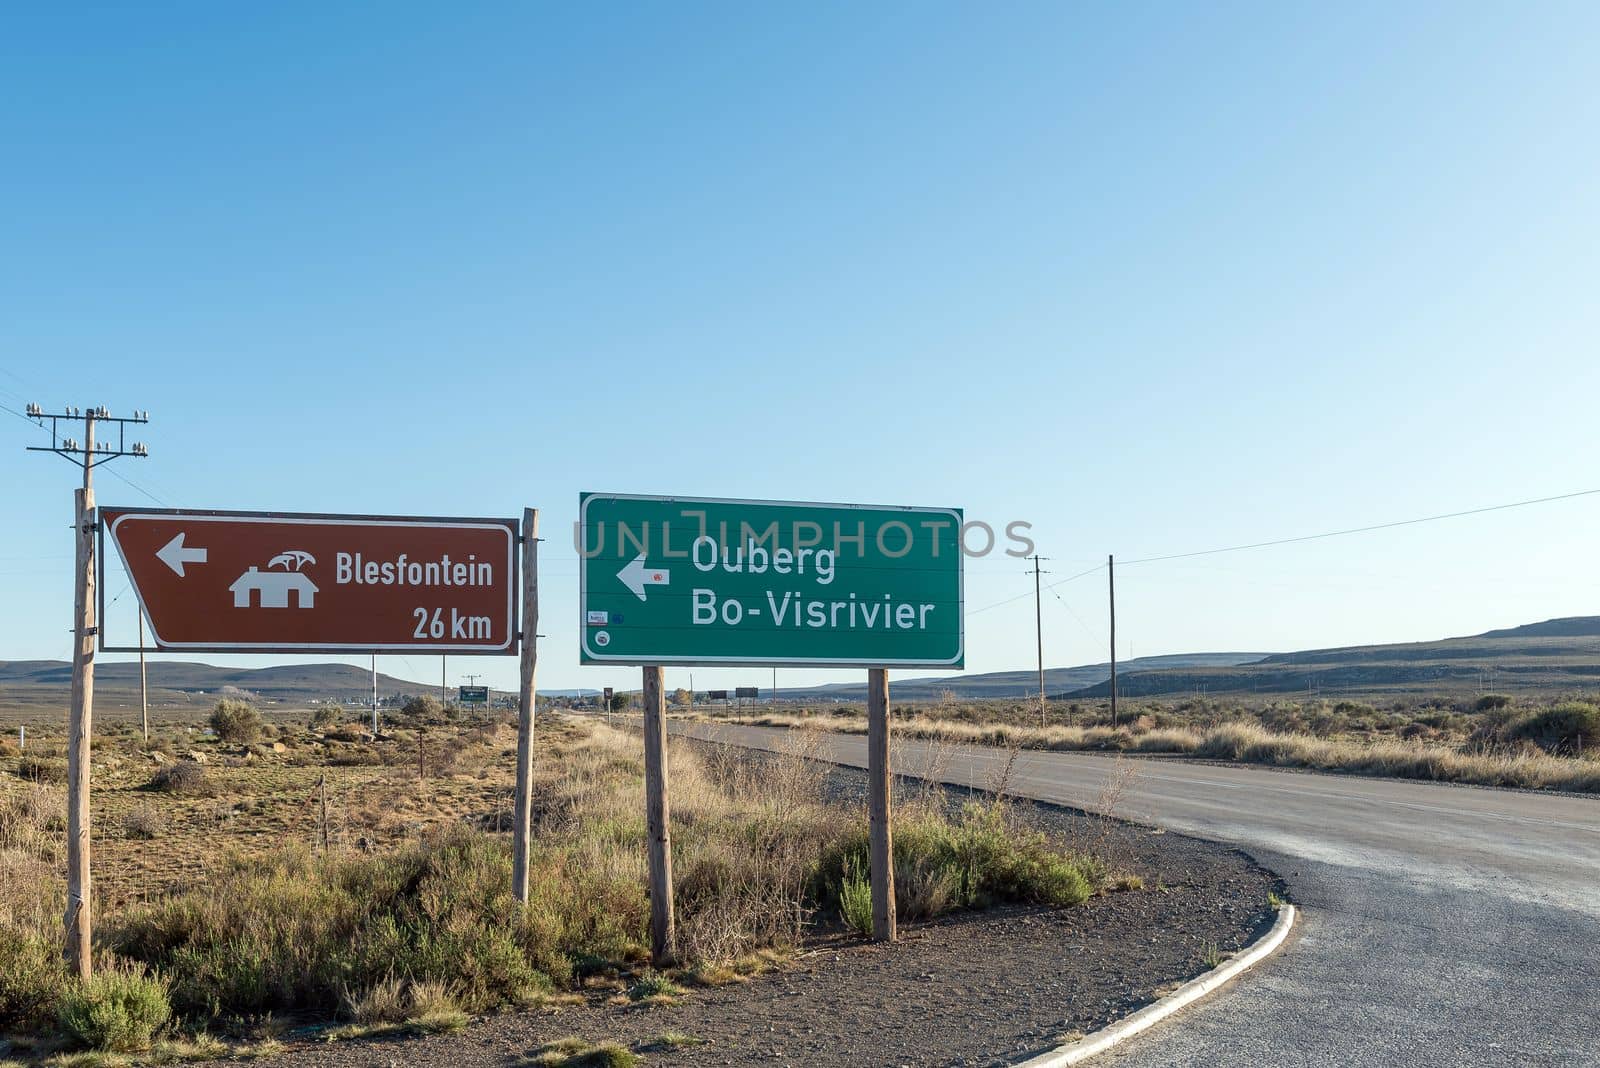 Directional signs at the turn off from road R354 to Ouberg Pass near Sutherland in the Northern Cape Province